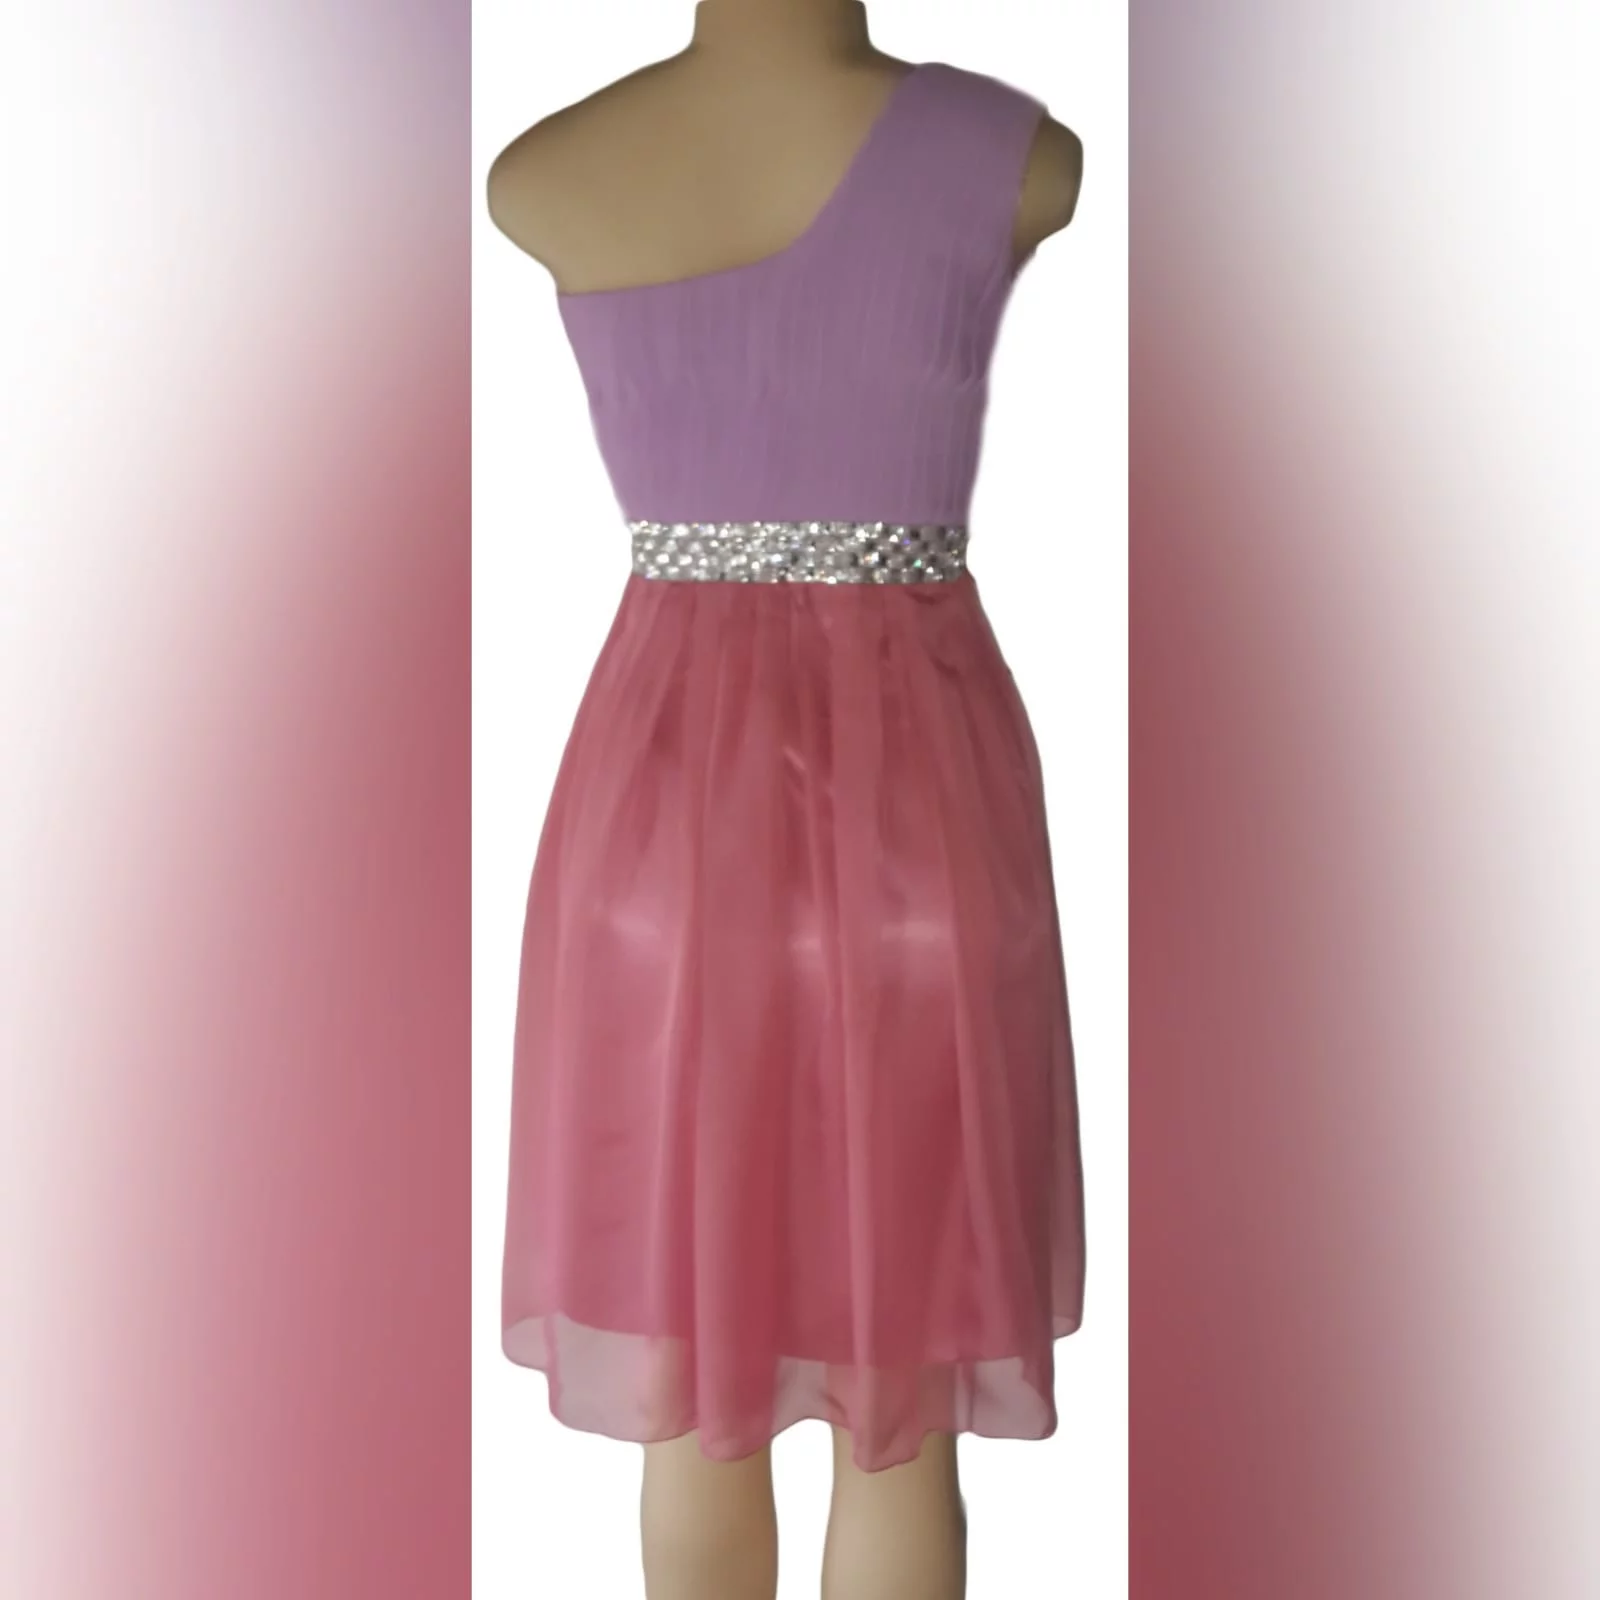 Lilac & dusty pink pink chiffon bridesmaid dress 4 lilac & dusty pink pink chiffon bridesmaid dress with a single shoulder sweetheart neckline. Pleated bodice with a silver belt bling detail.